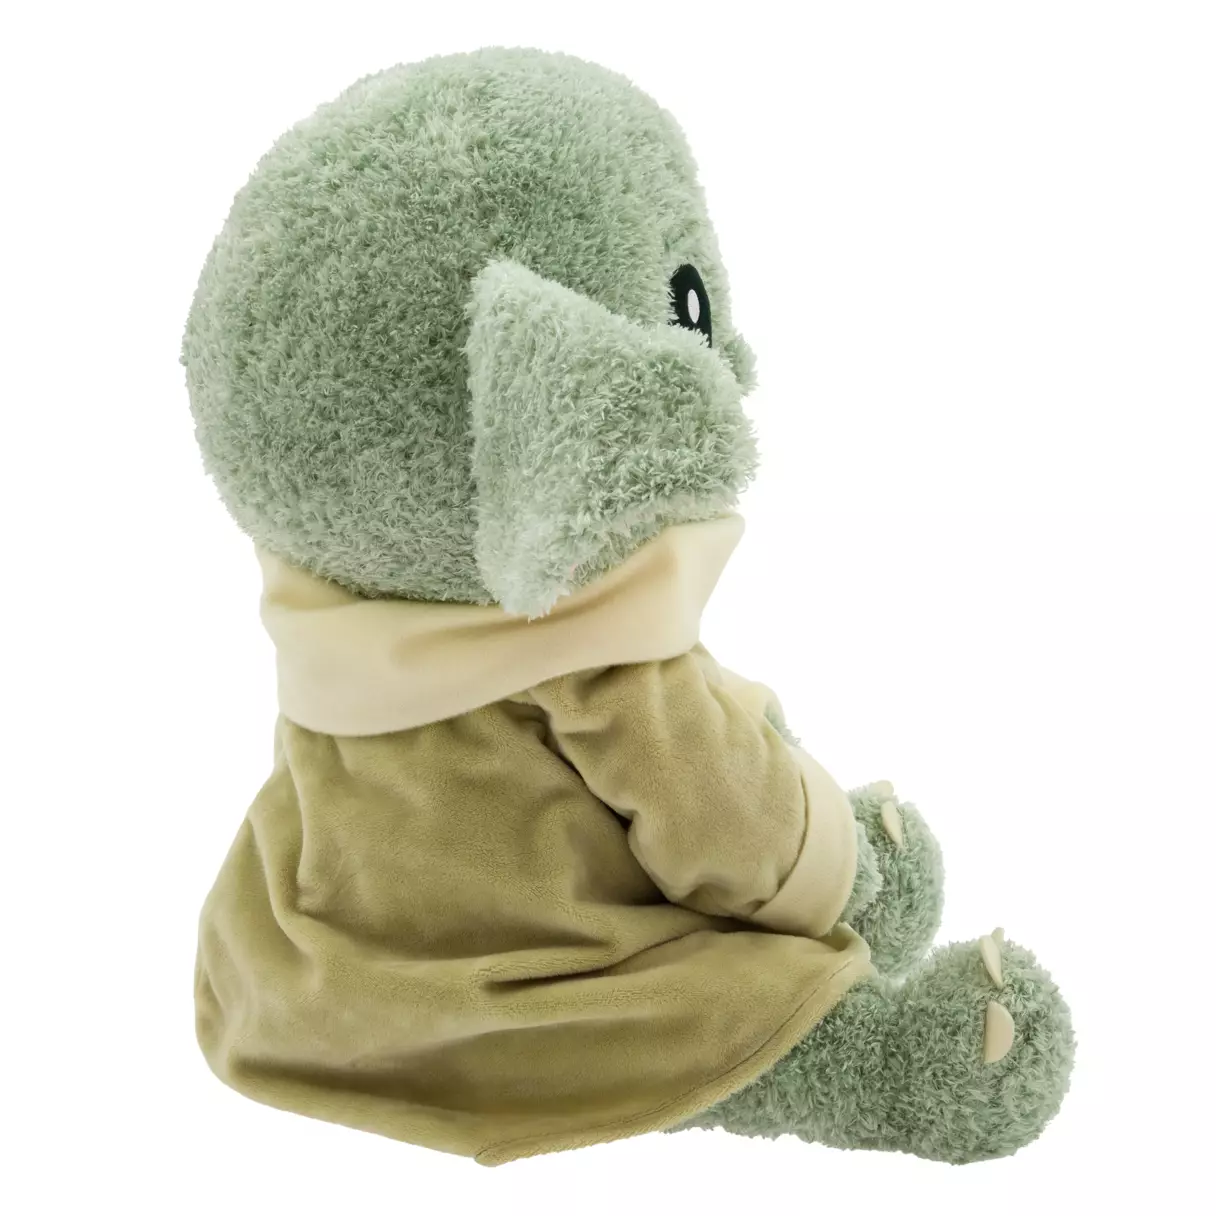 TM The Child (Grogu) Weighted Plush Toy 2